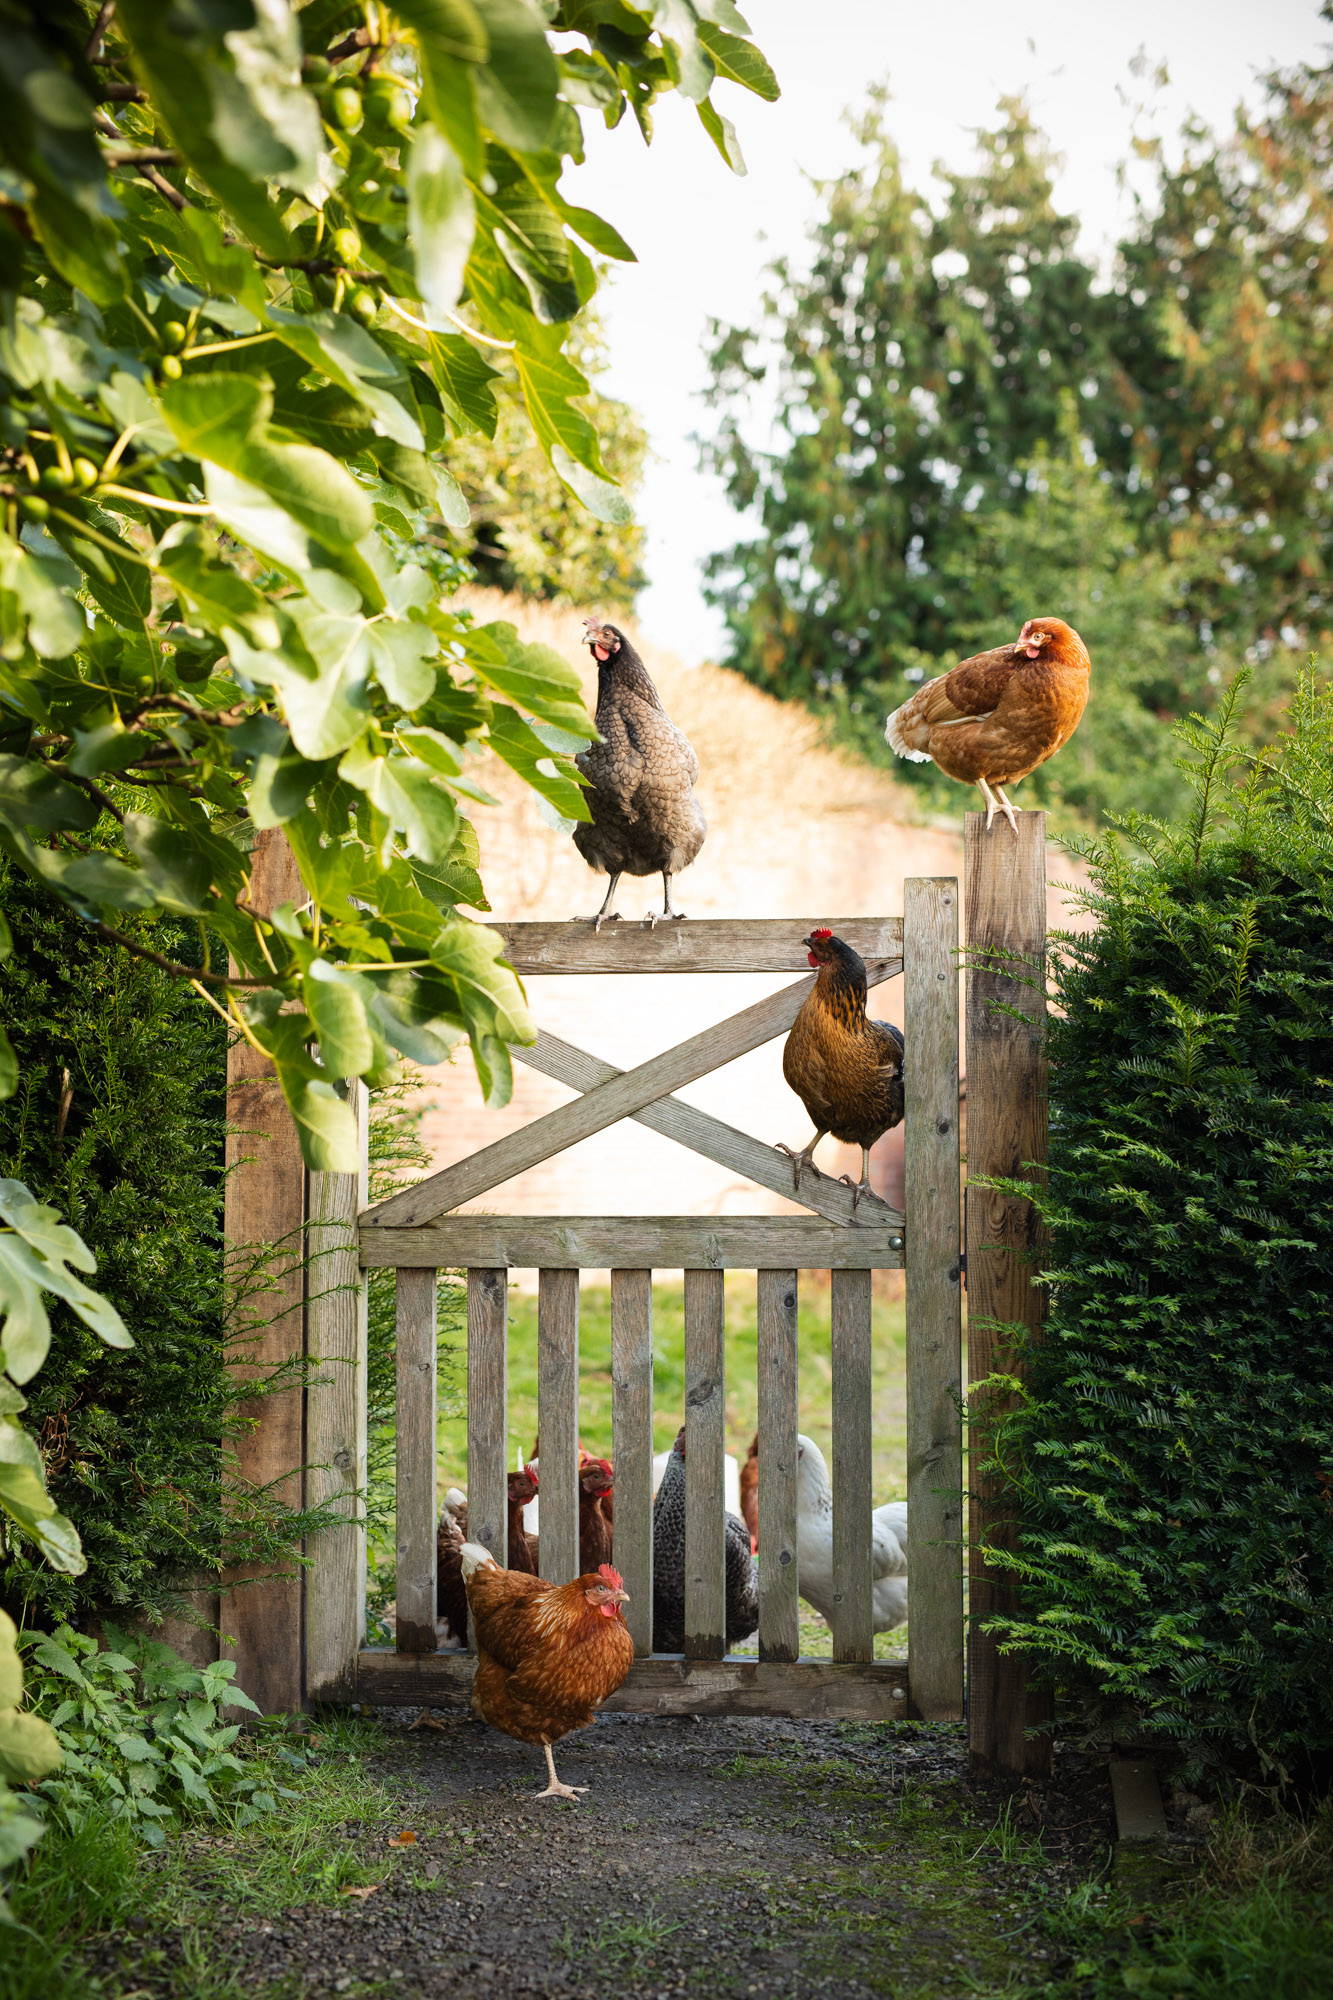 Chickens climbing over a gate